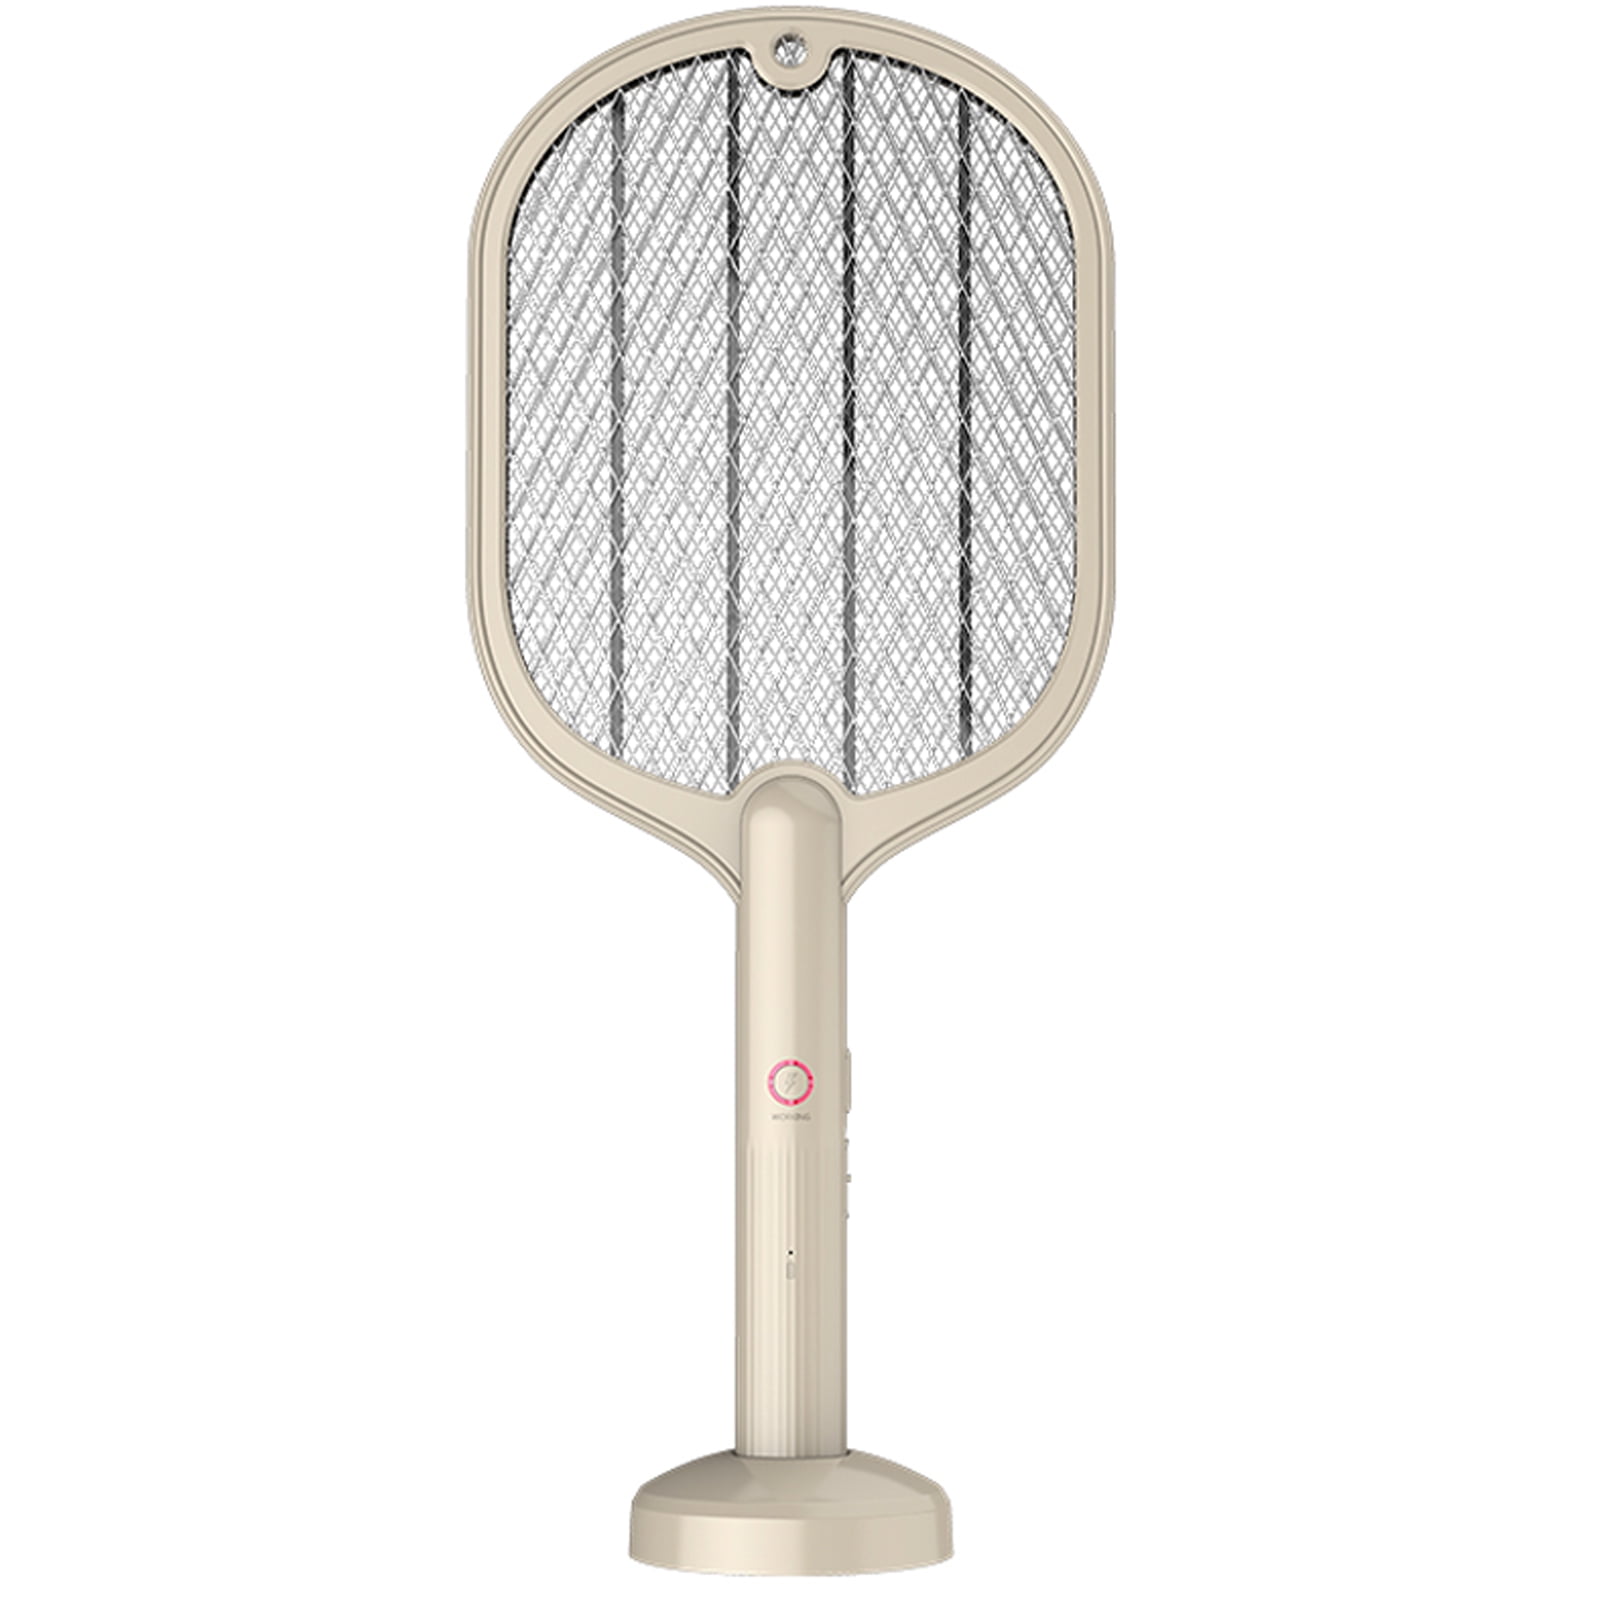 Thanos 2in1 Electric Fly Swatter Racket and Bug Zapper Racquet Trap Mosquito Killer Rechargeable with UV Light That Attract Fly Insects 